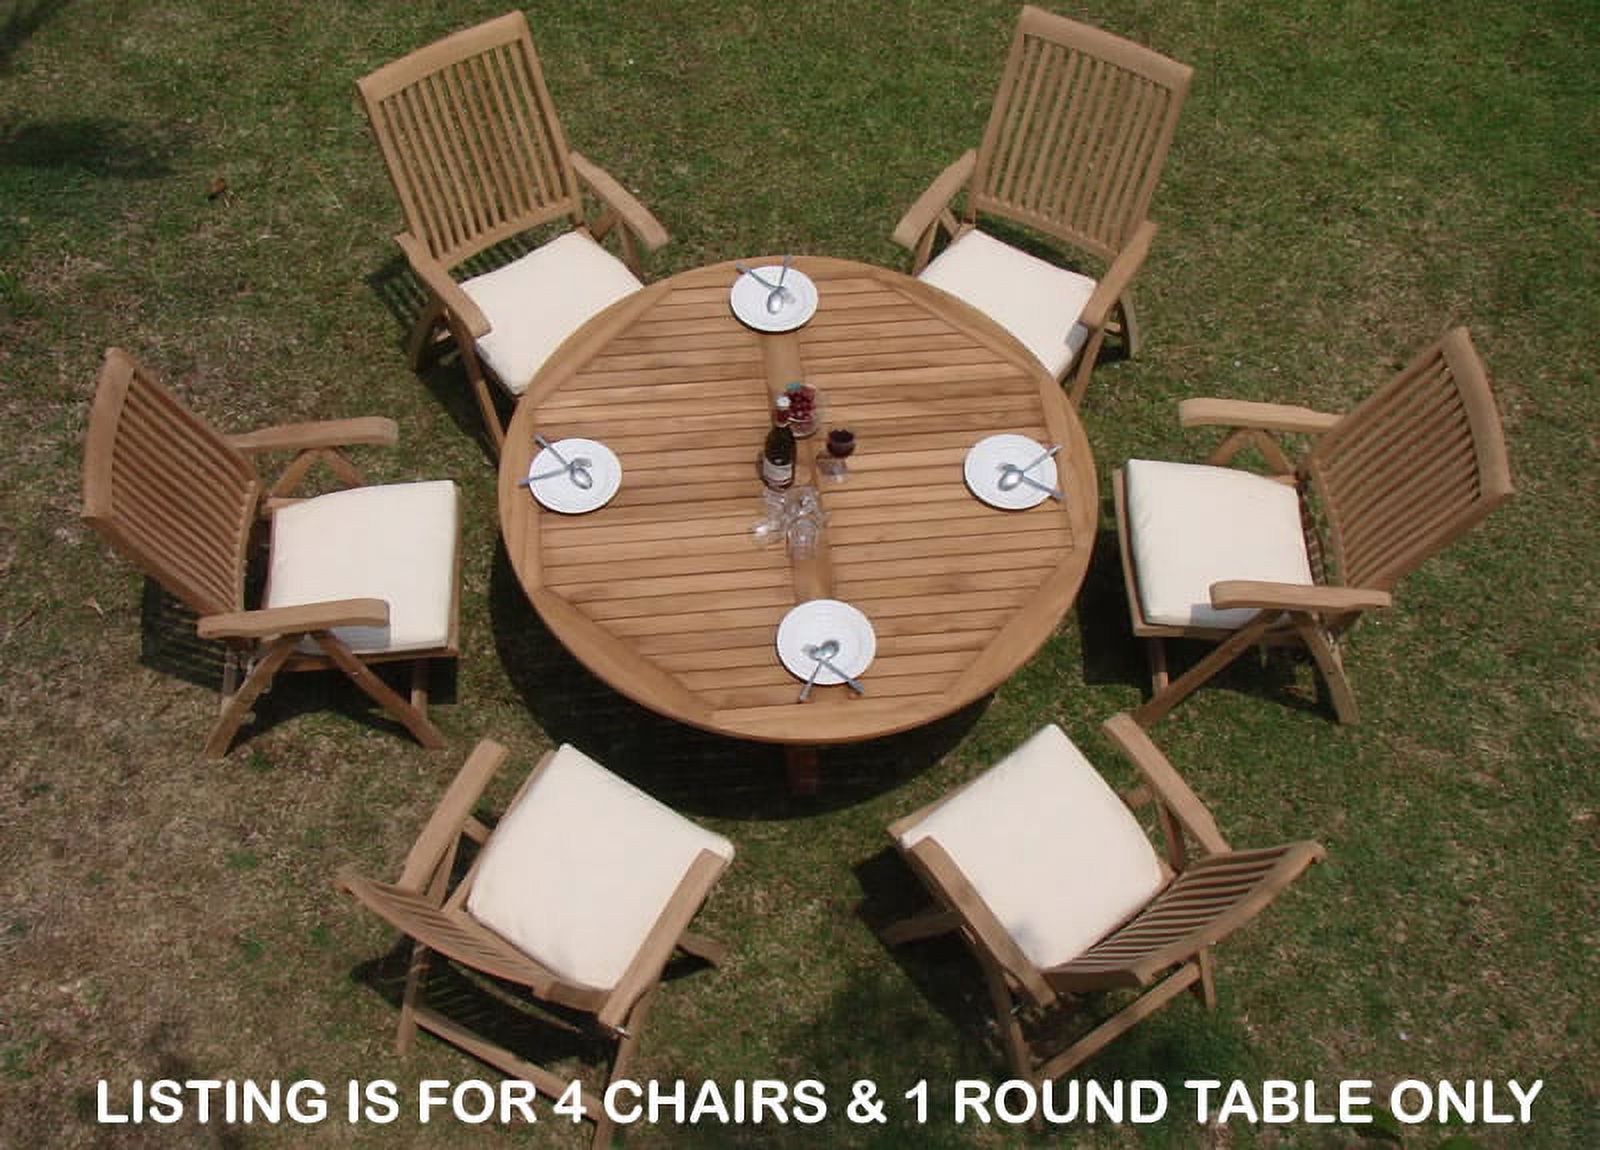 Teak Dining Set:4 Seater 5 Pc - 60" Round Table And 4 Marley Reclining Arm Chairs Outdoor Patio Grade-A Teak Wood WholesaleTeak #WMDSMR3 - image 1 of 4